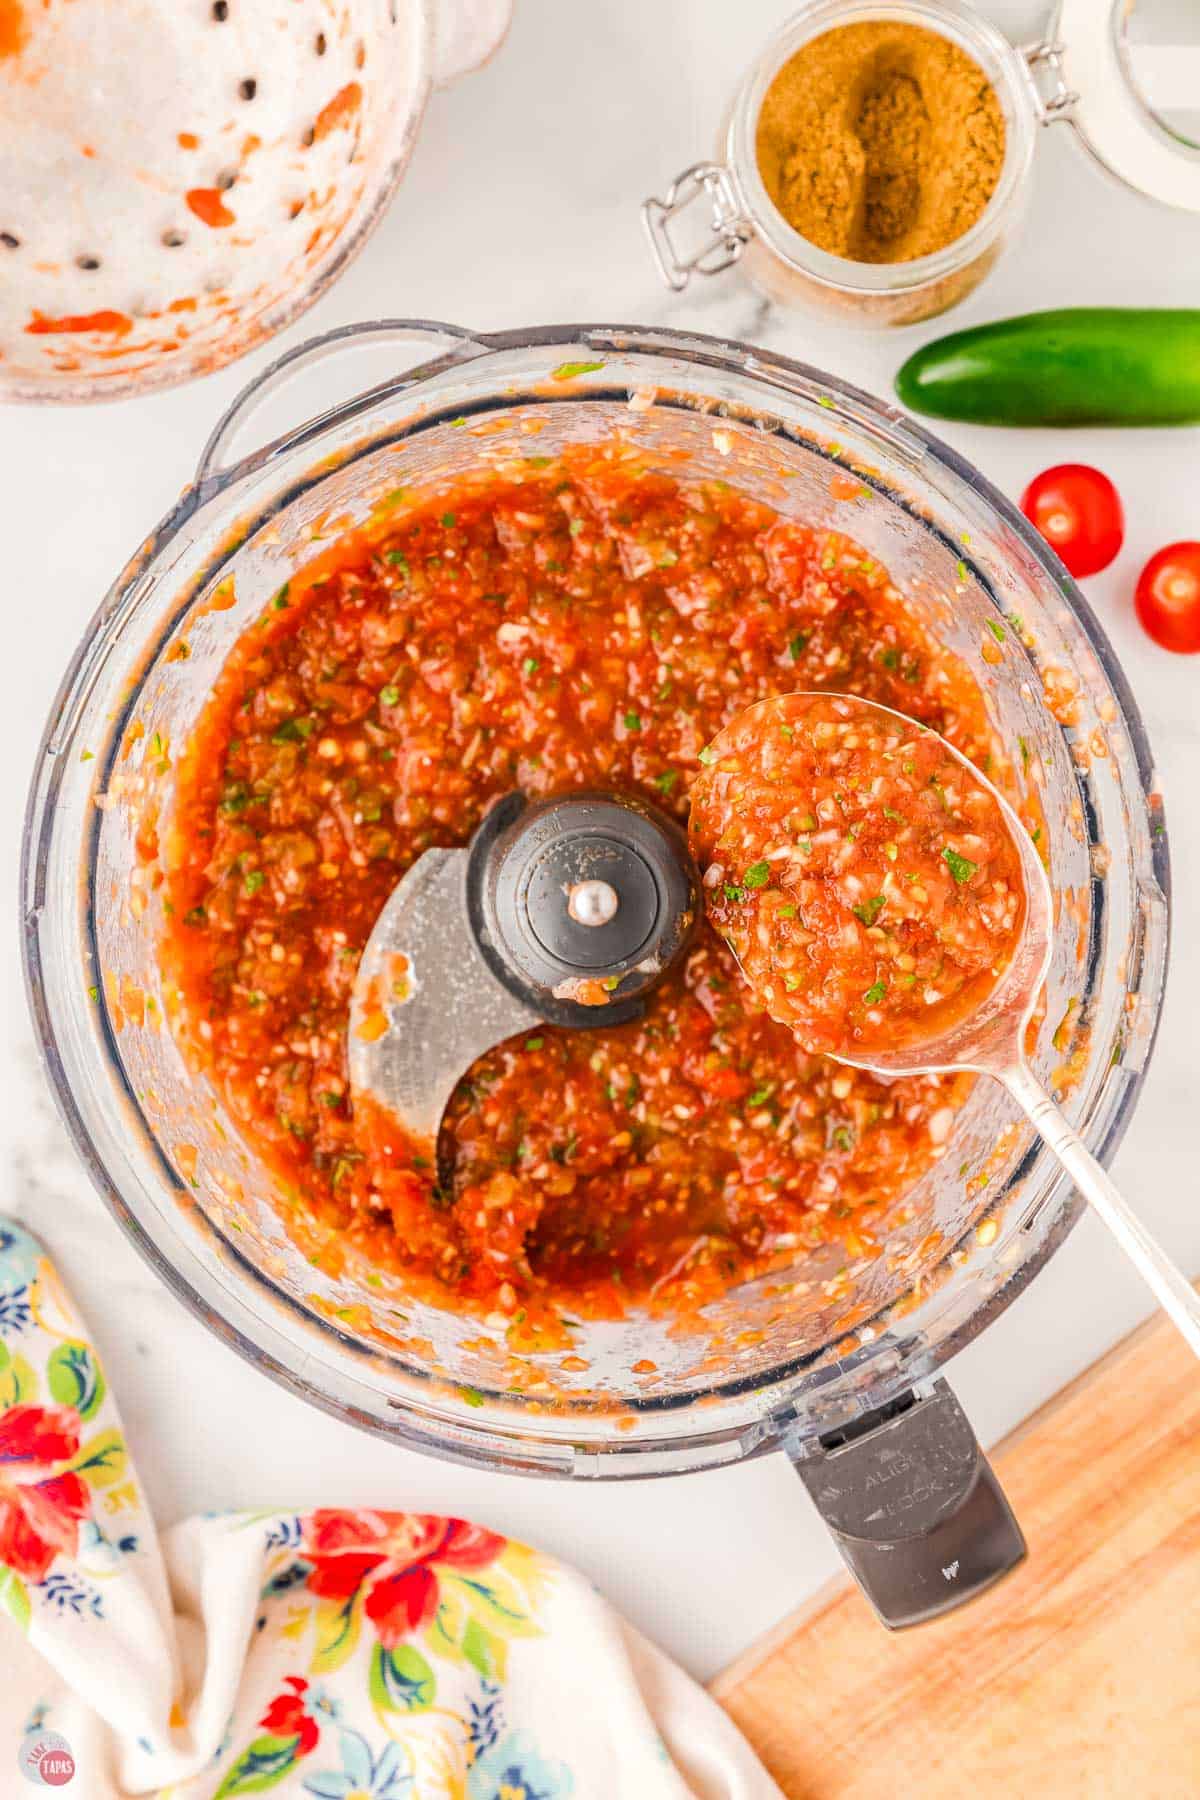 spoon scooping out restaurant style salsa